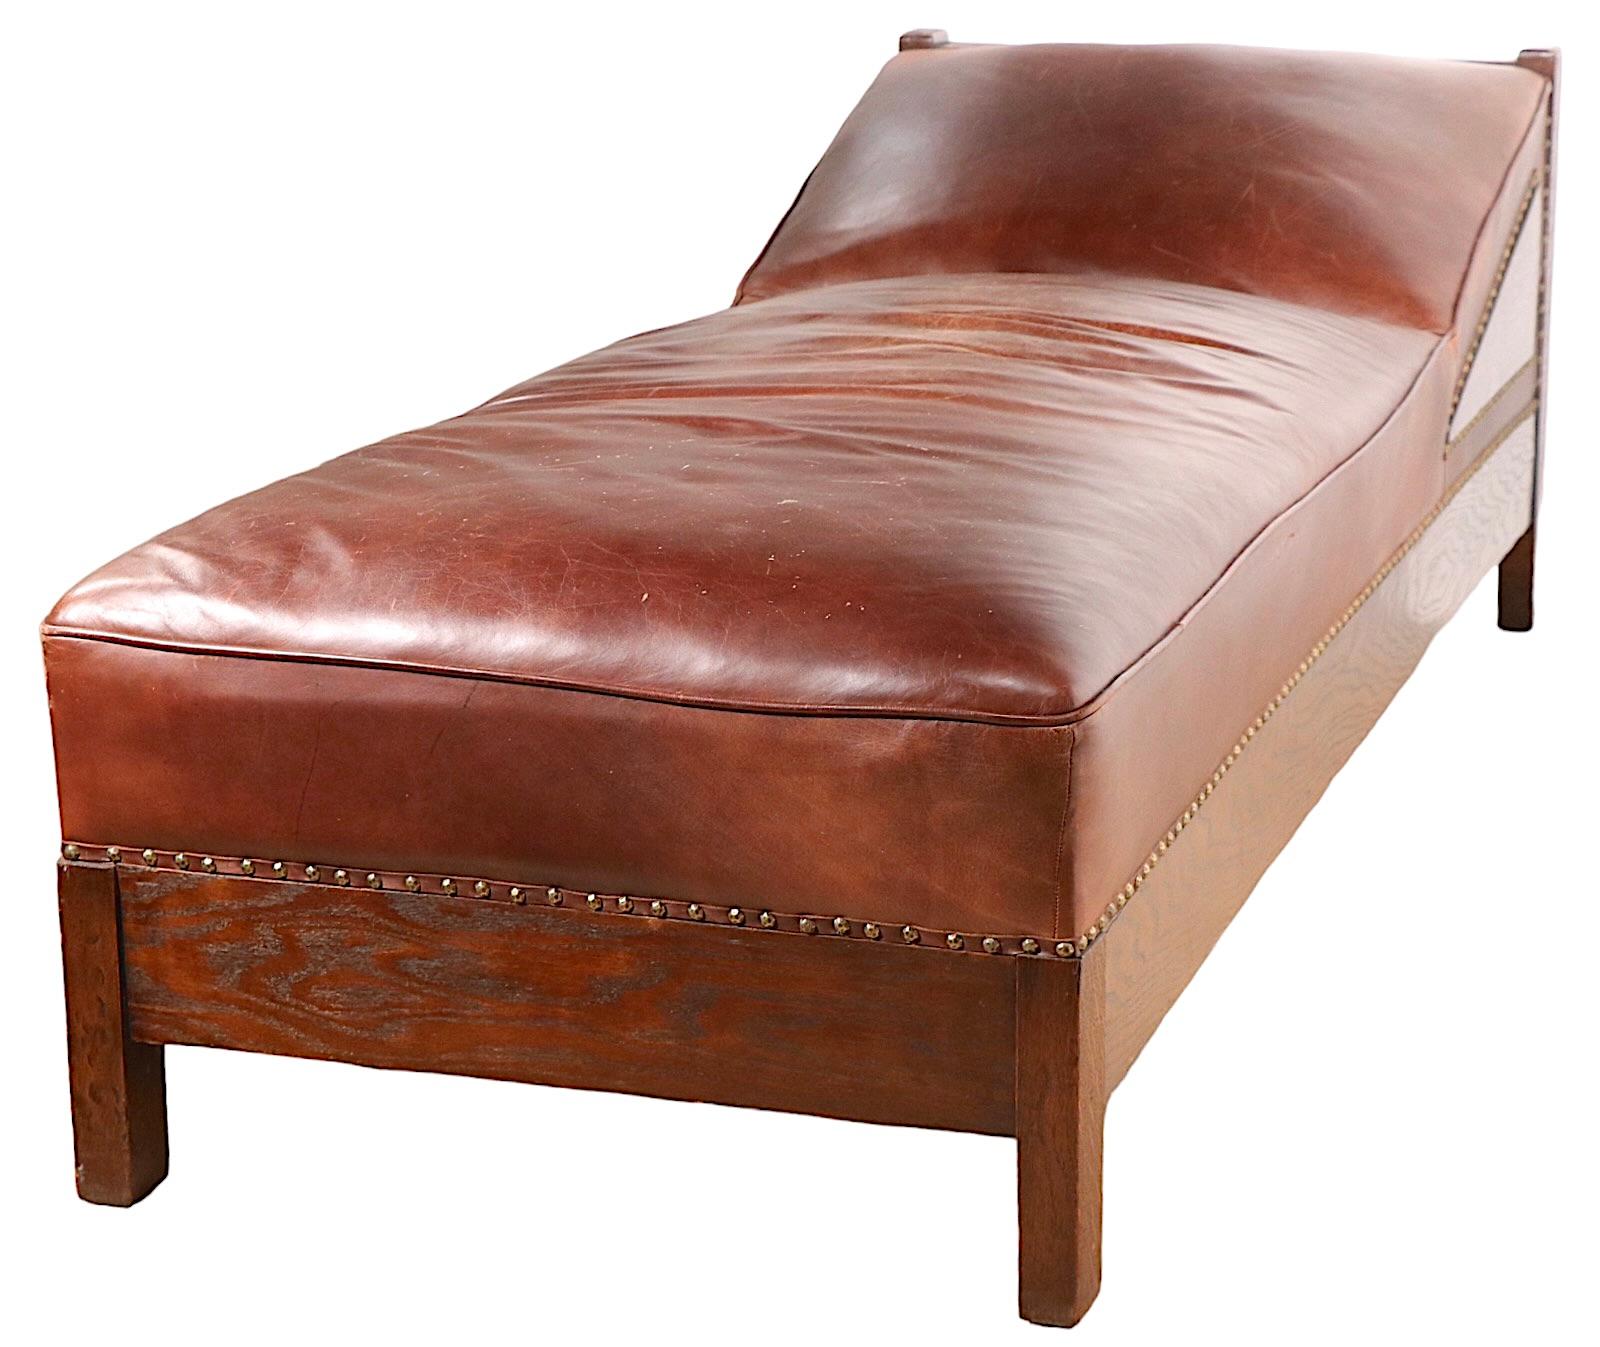 Oak and Leather Arts and Crafts Mission Daybed Chaise Lounge c. 1900 -1920's 1